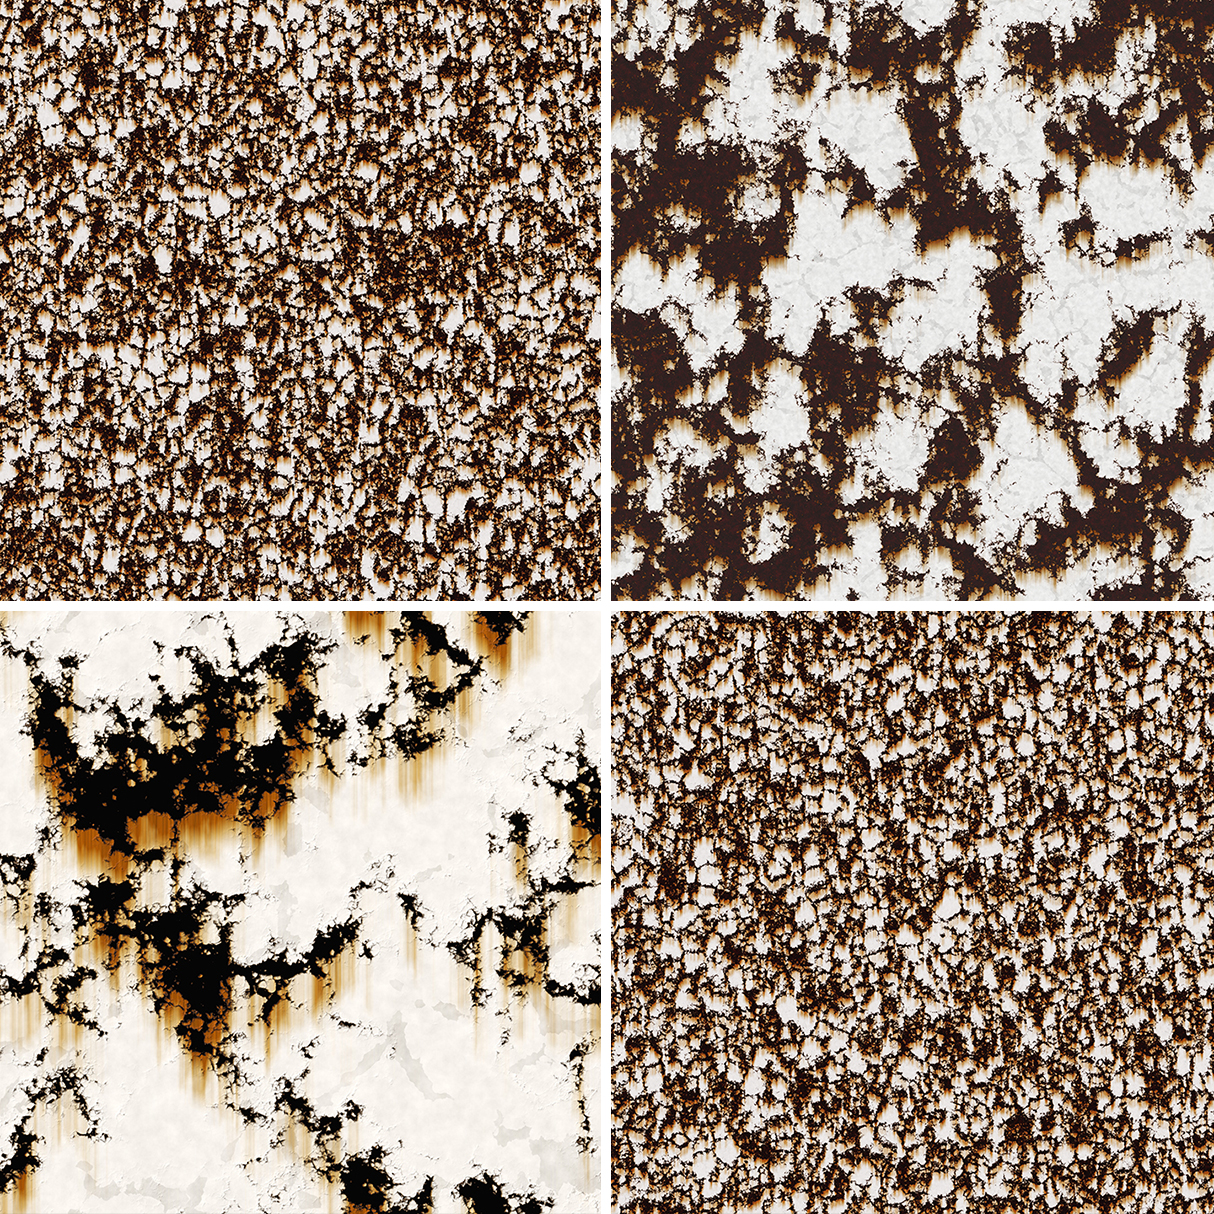 15 Rusty Paint Background 15 Rusty Paint Background Textures Square Samples Preview – 215 Rusty Paint Background Textures Square Samples Preview – 4